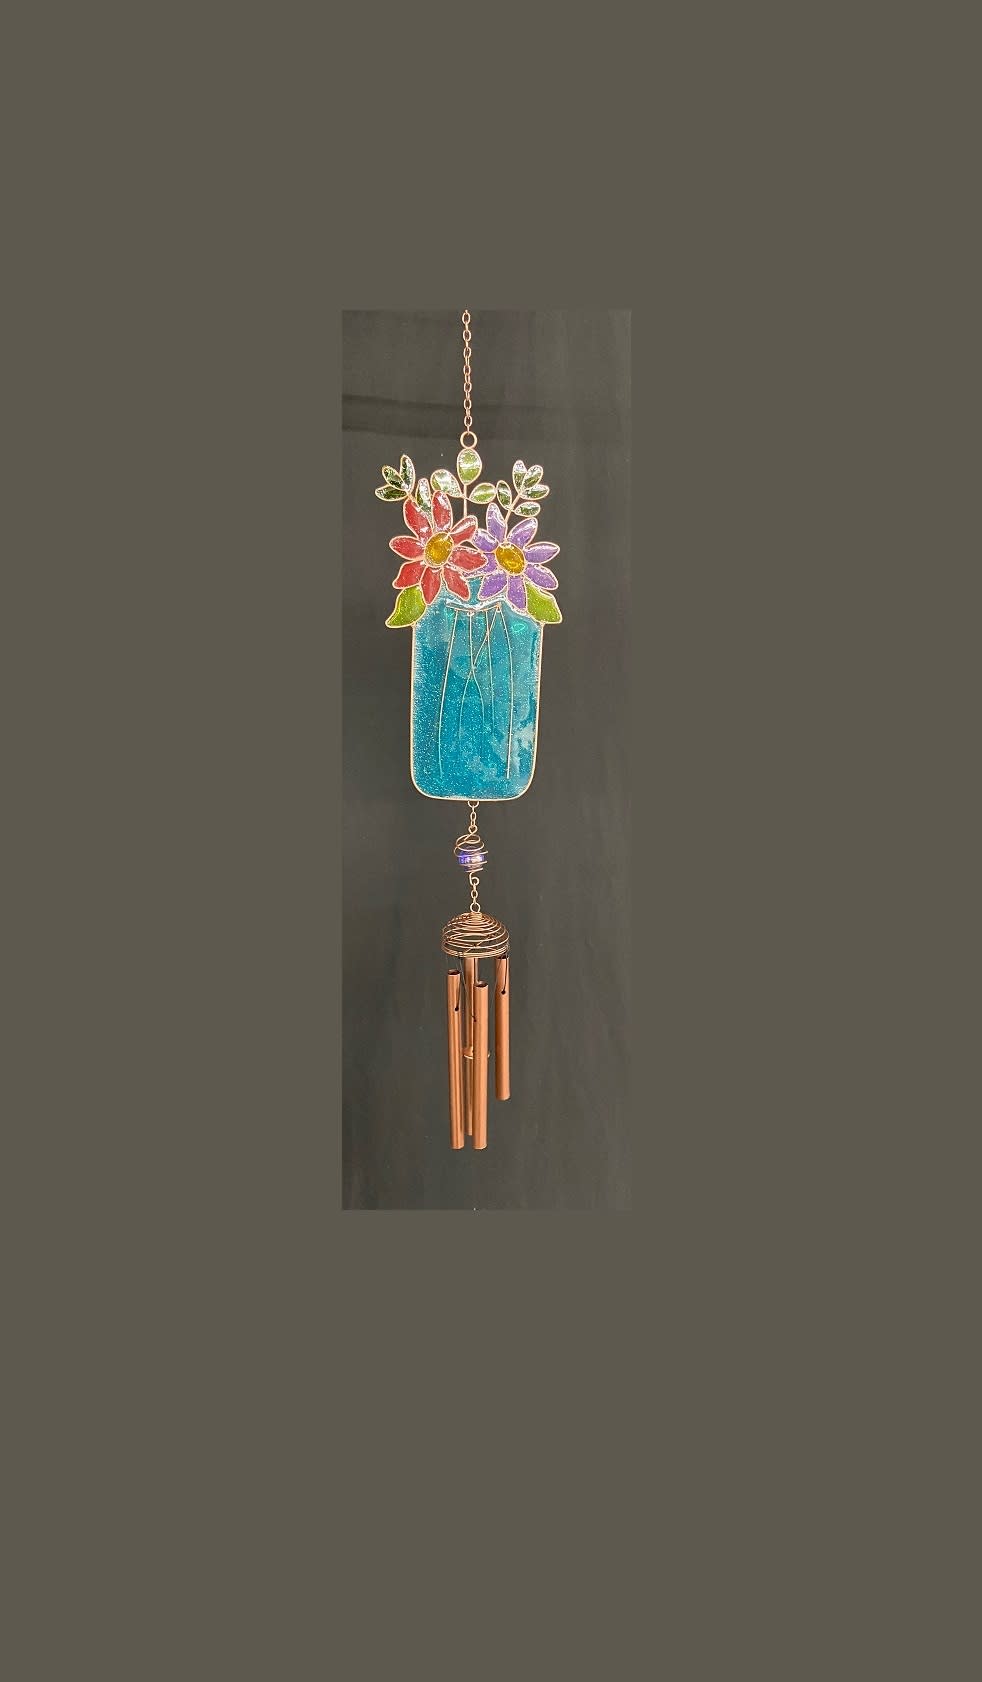 Mason Jar Suncatcher Mini-Chime - This colorful sun catcher mini chime is 31in long. Sold individually for $28.75 or displayed on an easel with floral design for $48.75.